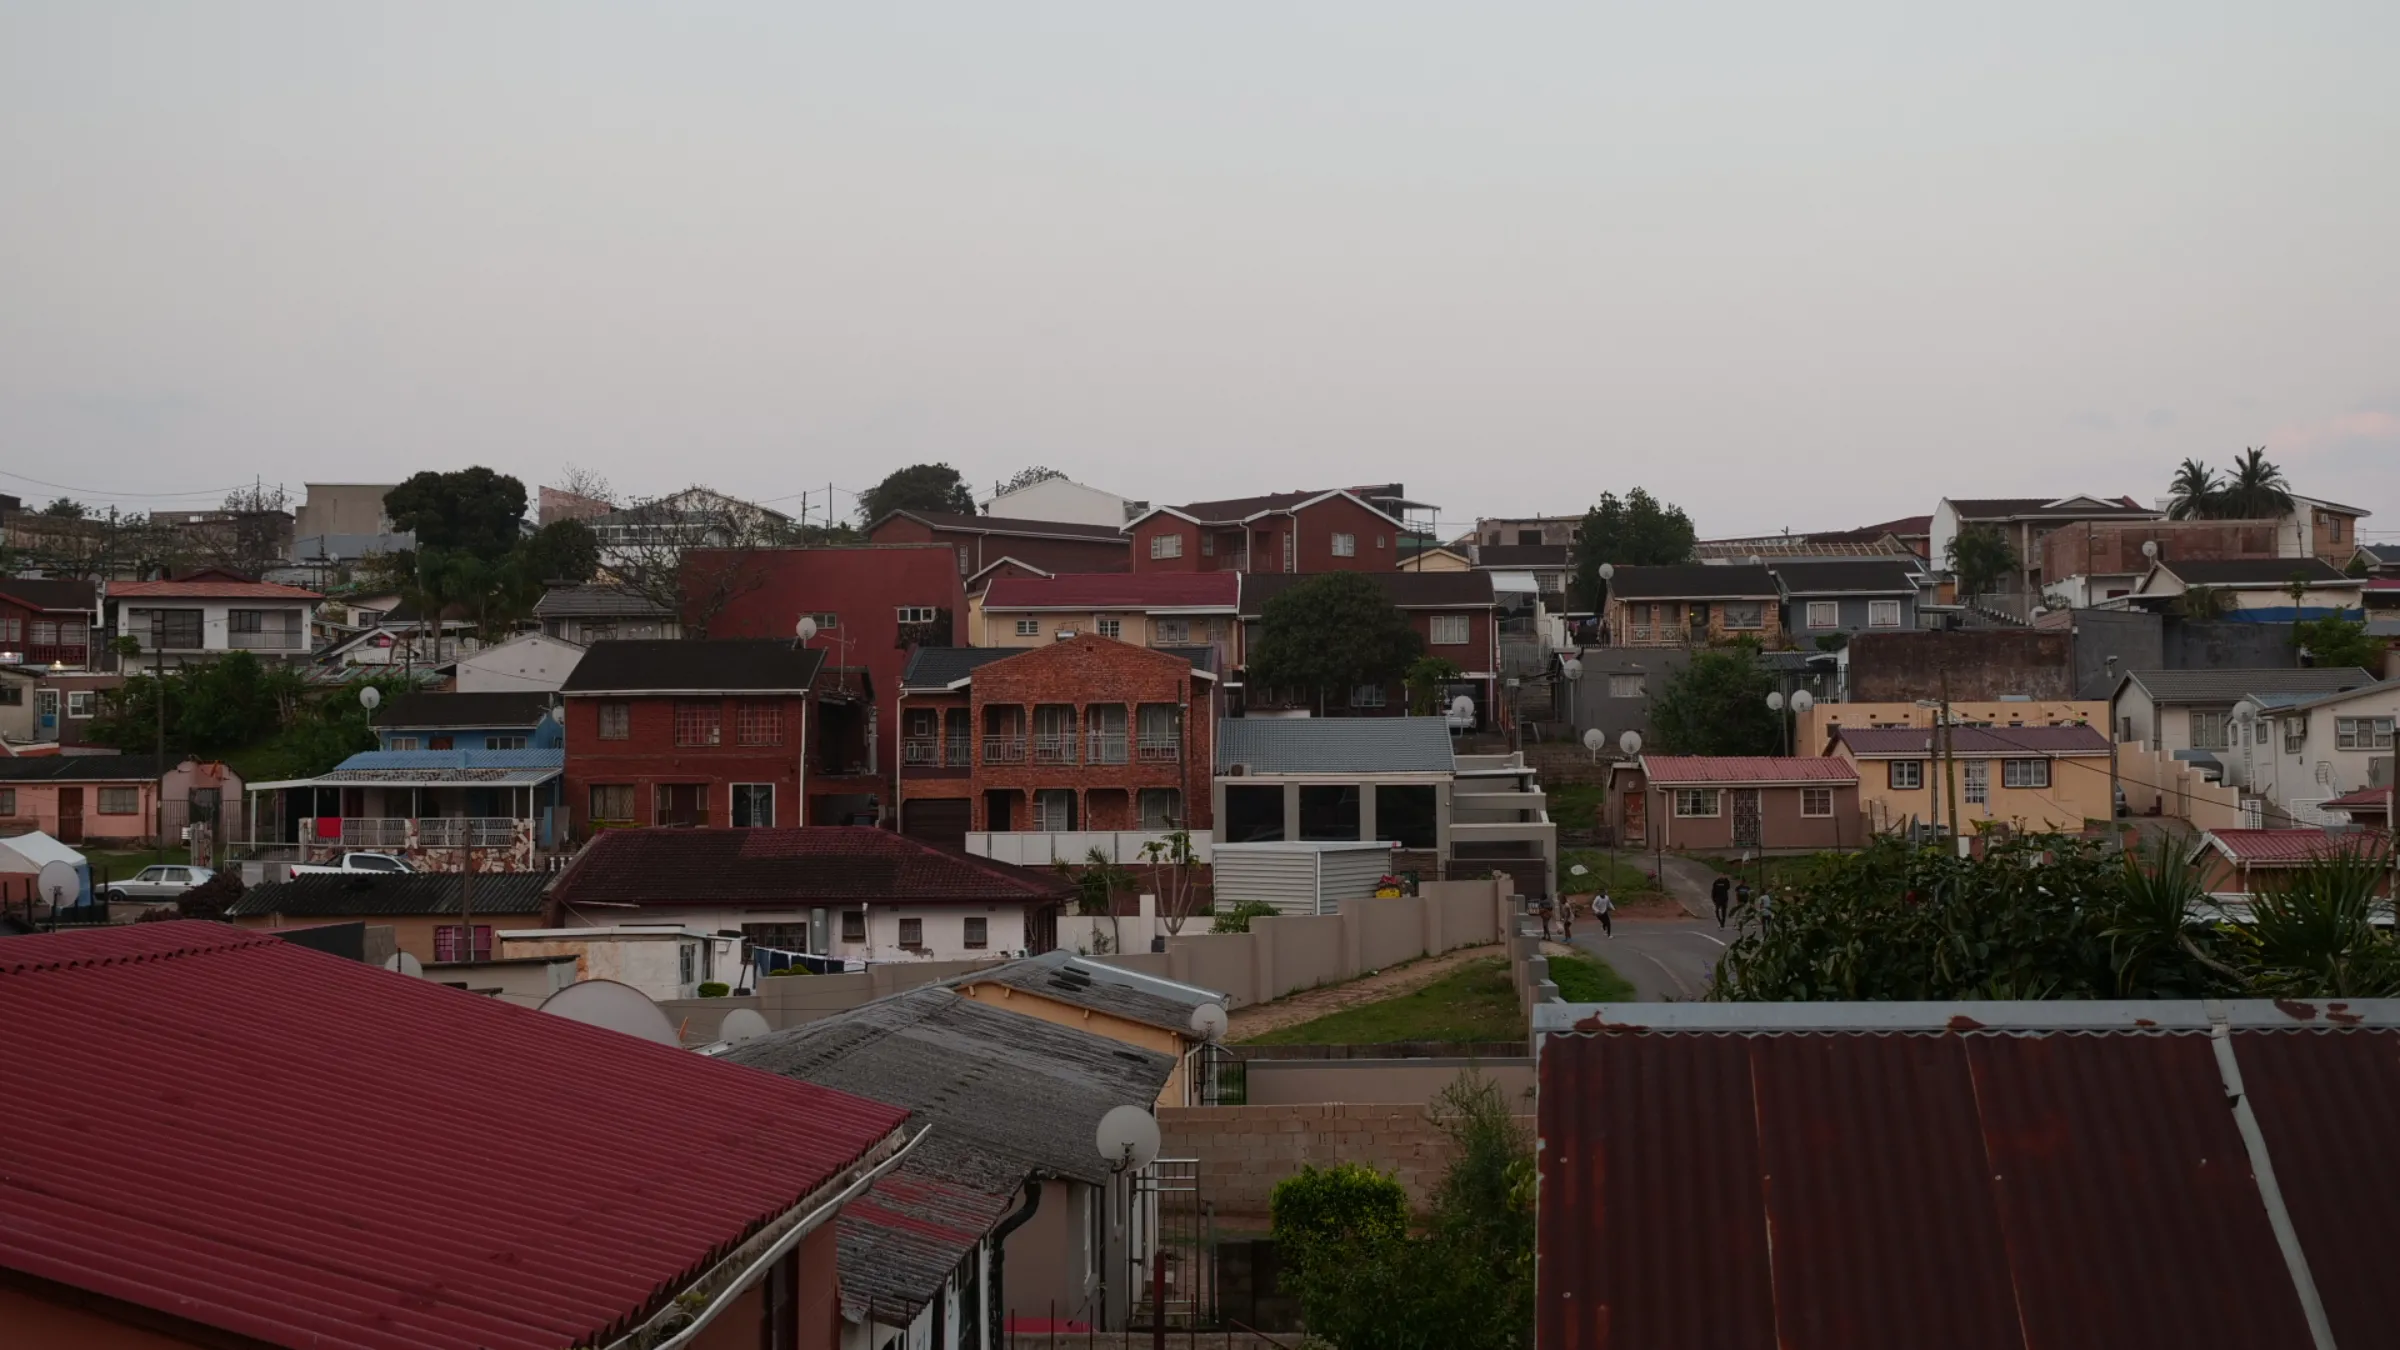 Houses in Chatsworth, a large township established in the 1950s to segregate the Indian population in Durban, South Africa.